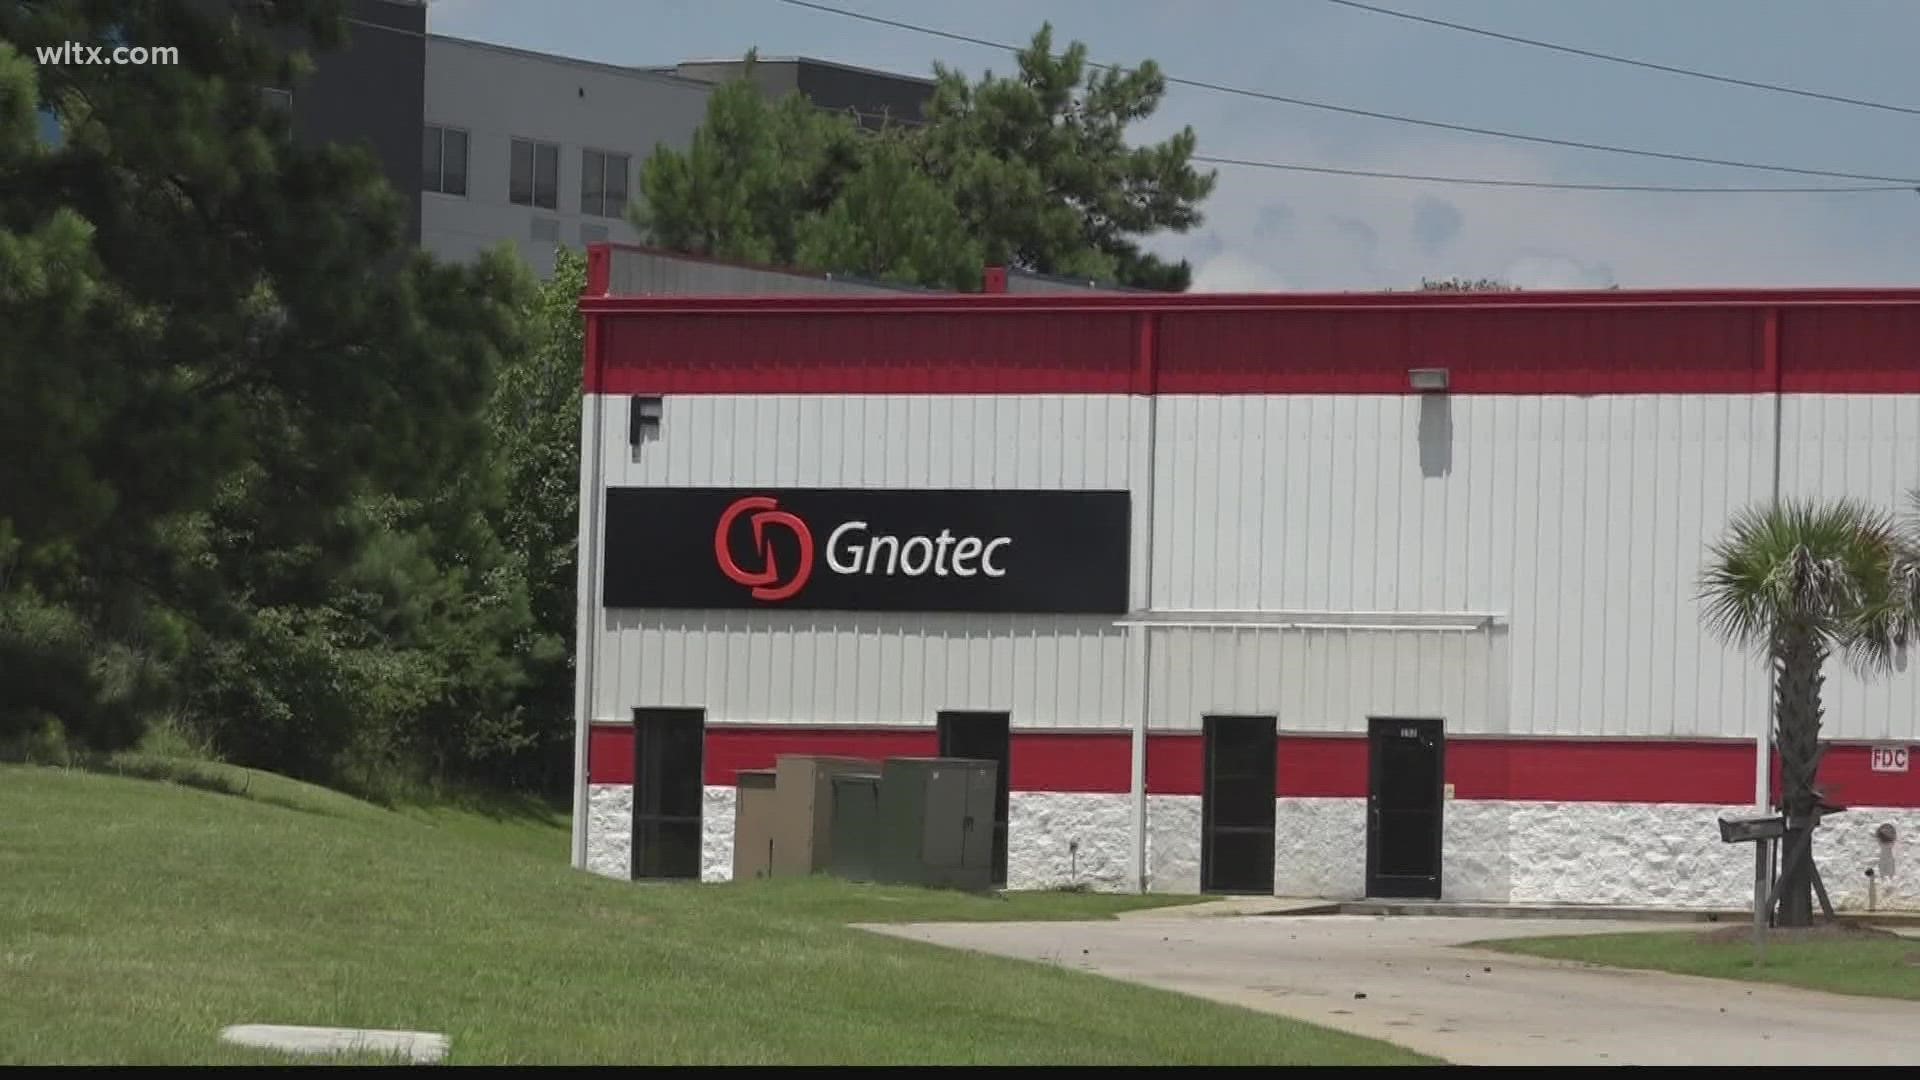 An auto parts company is finding a new home in Orangeburg, Kuntai.